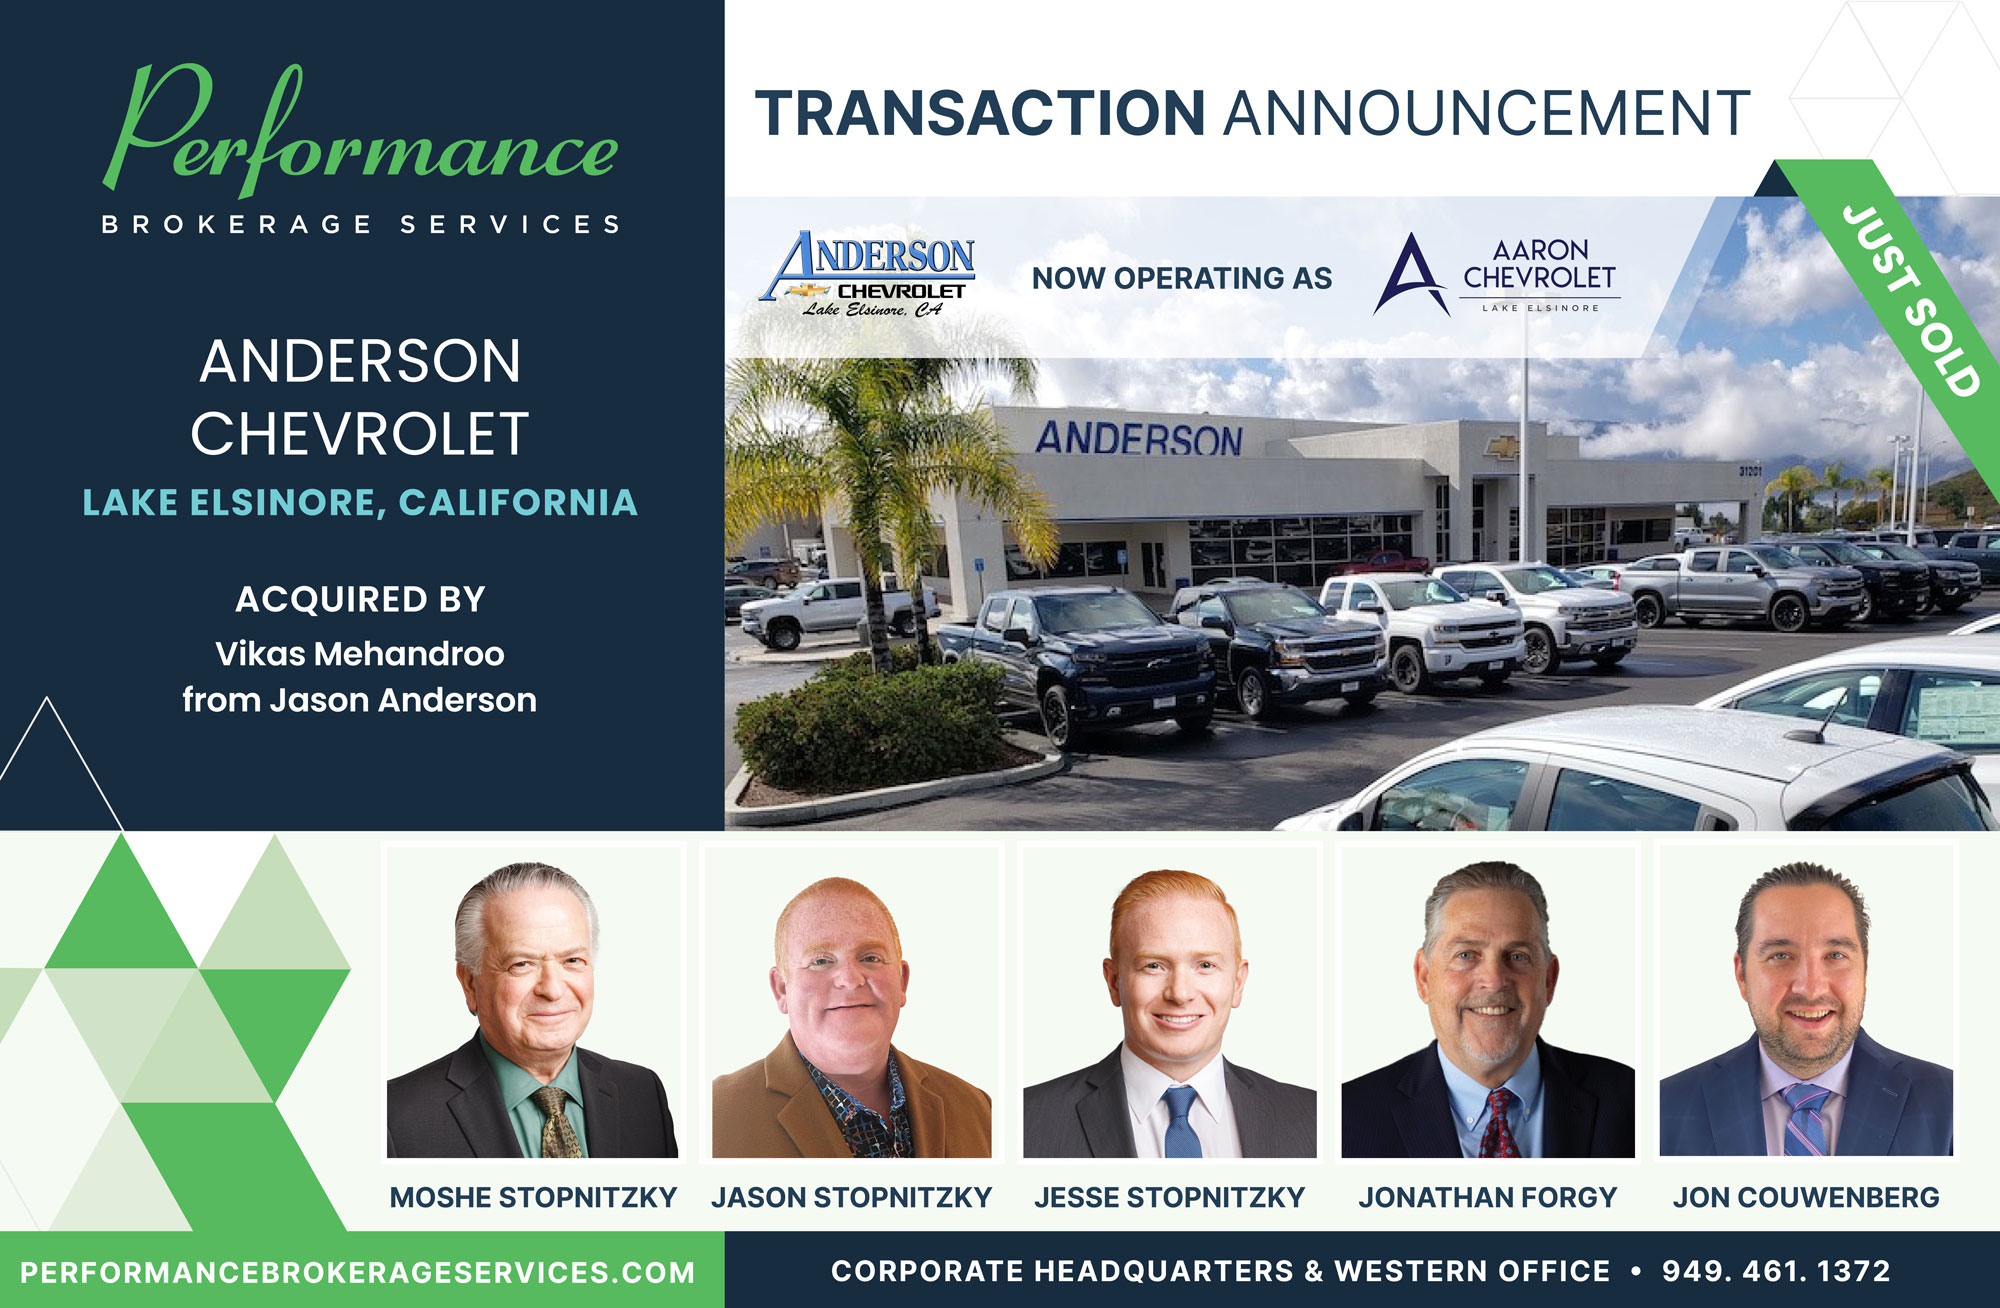 Anderson Chevrolet sells to Aaron Auto Group with Performance Brokerage